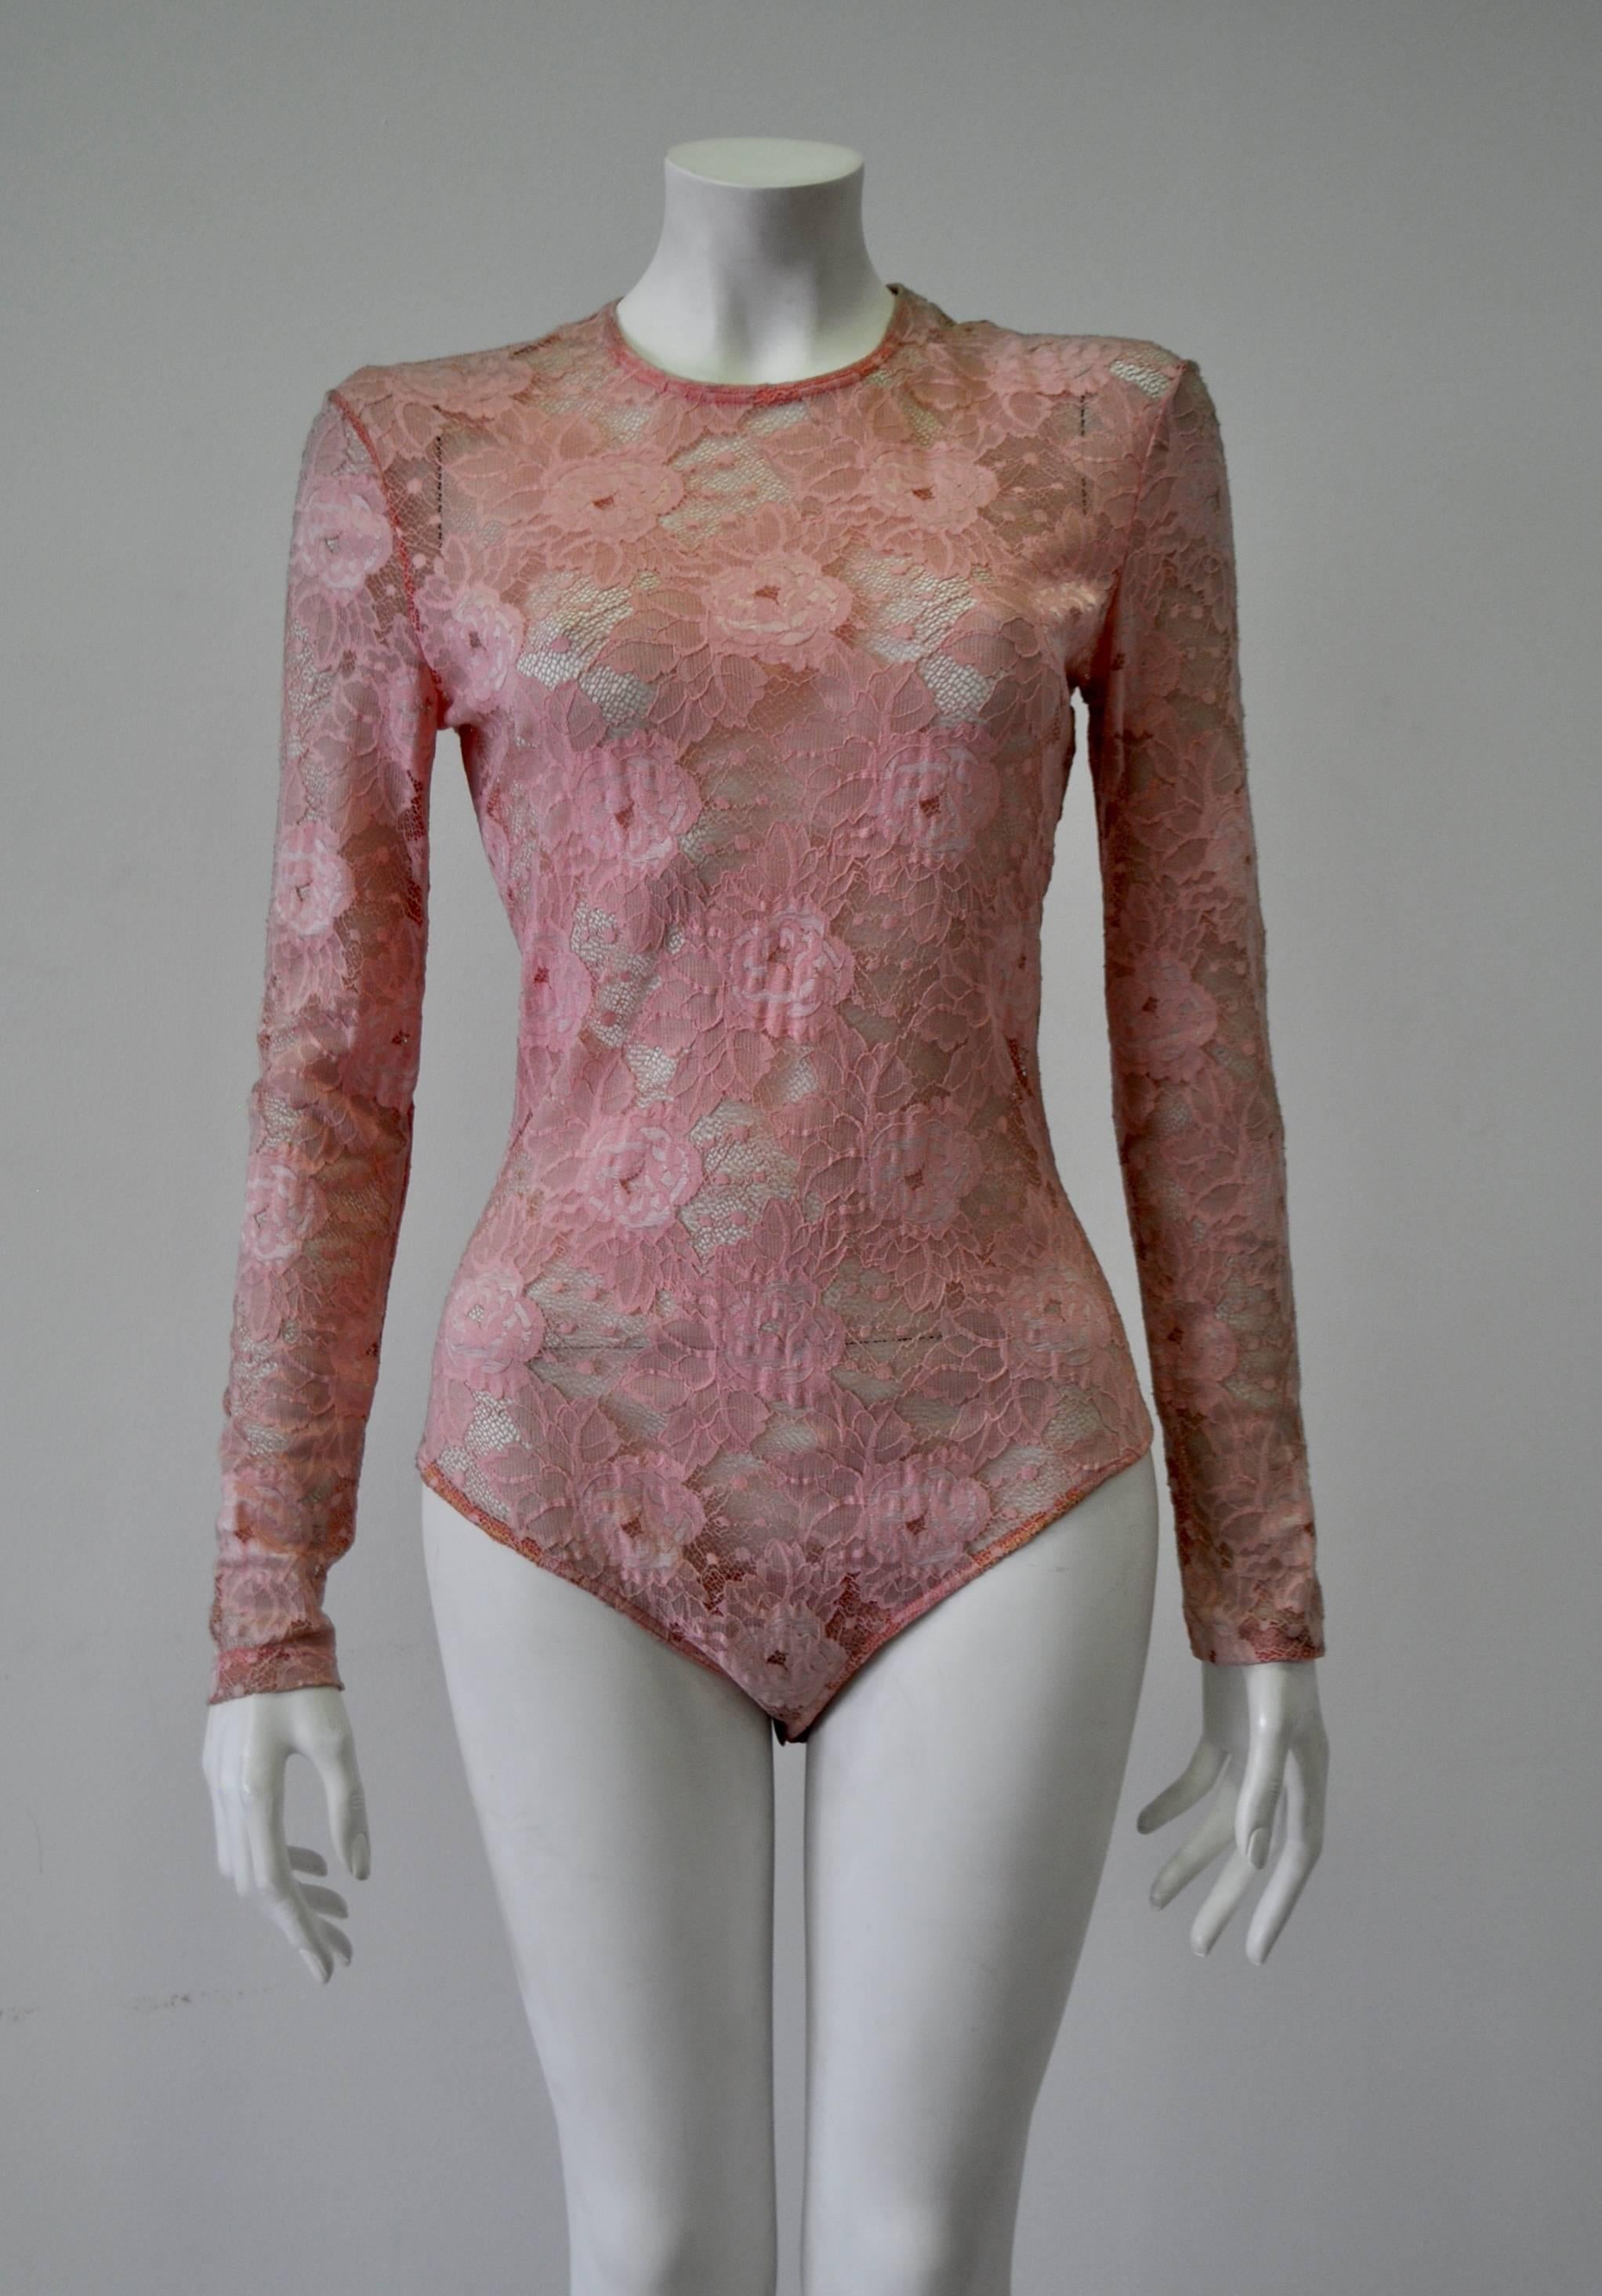 Brown Rare Gianni Versace Istante Pink Lace Bodysuit